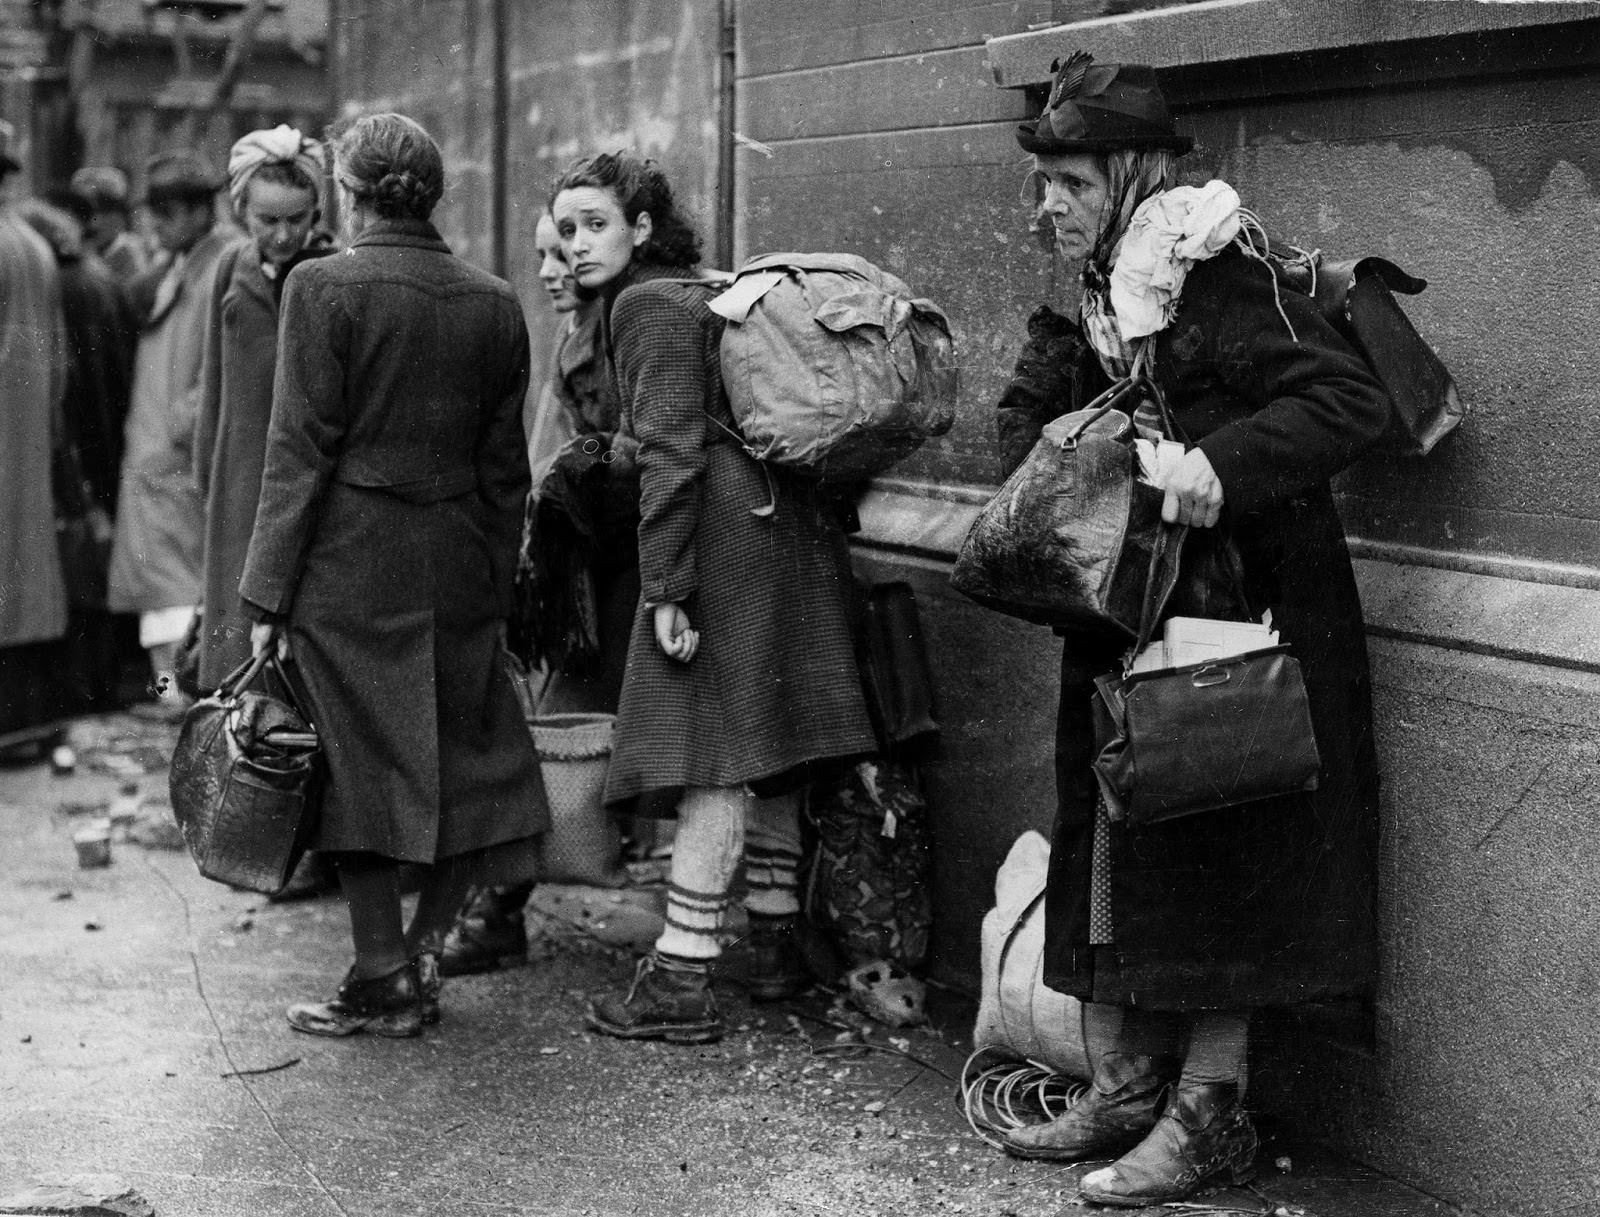 German civilian refugees prepare to flee war-torn Aachen, Germany as the battle for the doomed city draws to a close, Oct. 24, 1944.